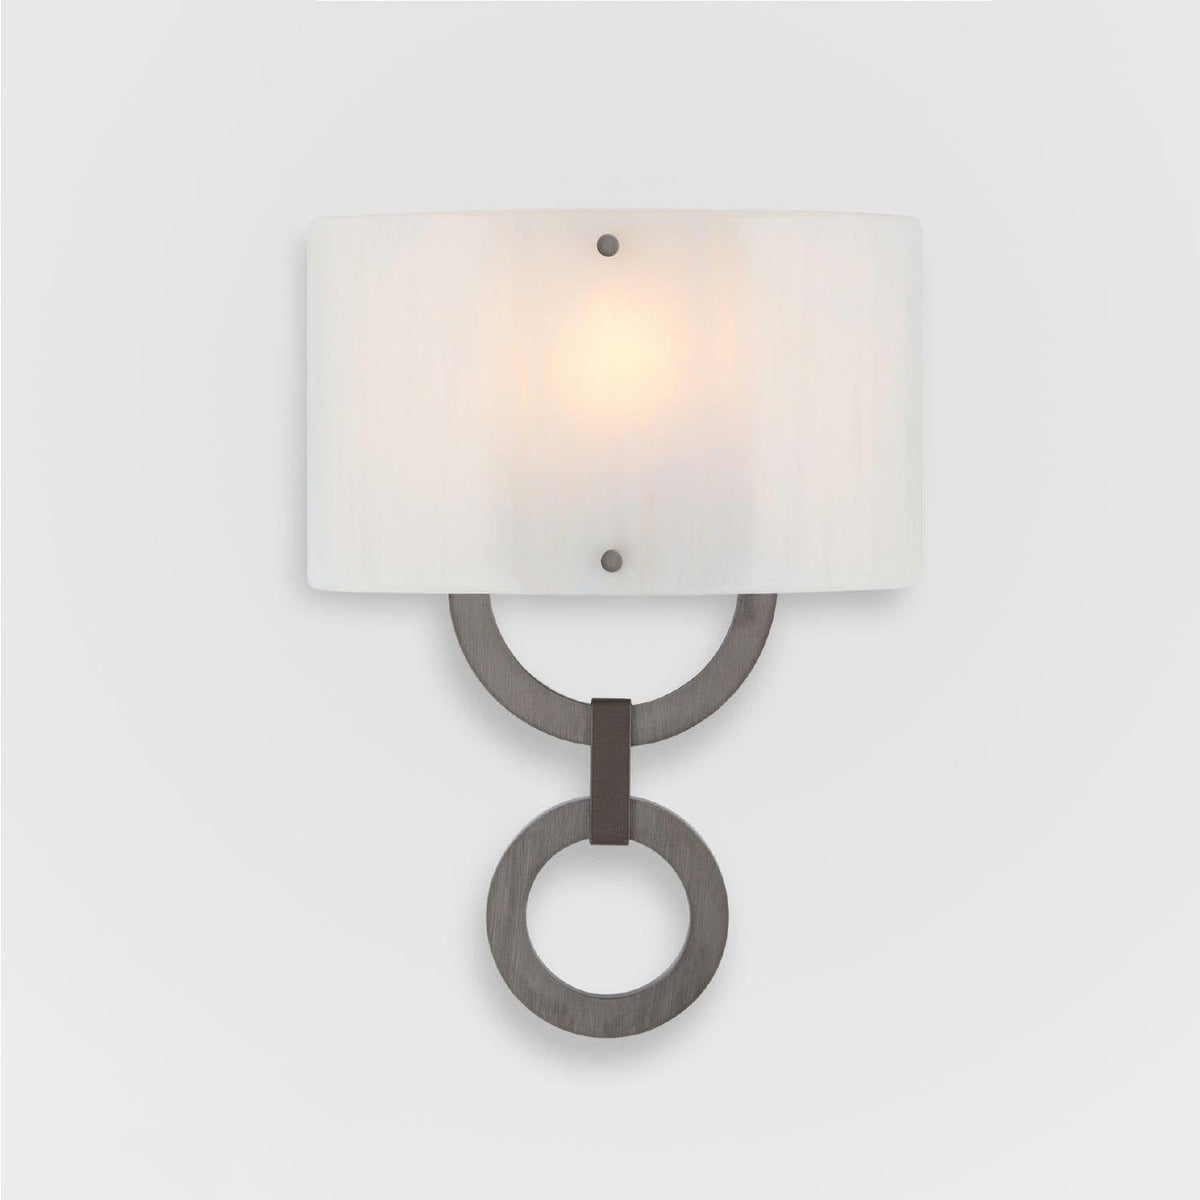 Hammerton Studio - Carlyle Round Link Cover Sconce - CSB0033-0D-SN-IW-E2 | Montreal Lighting & Hardware